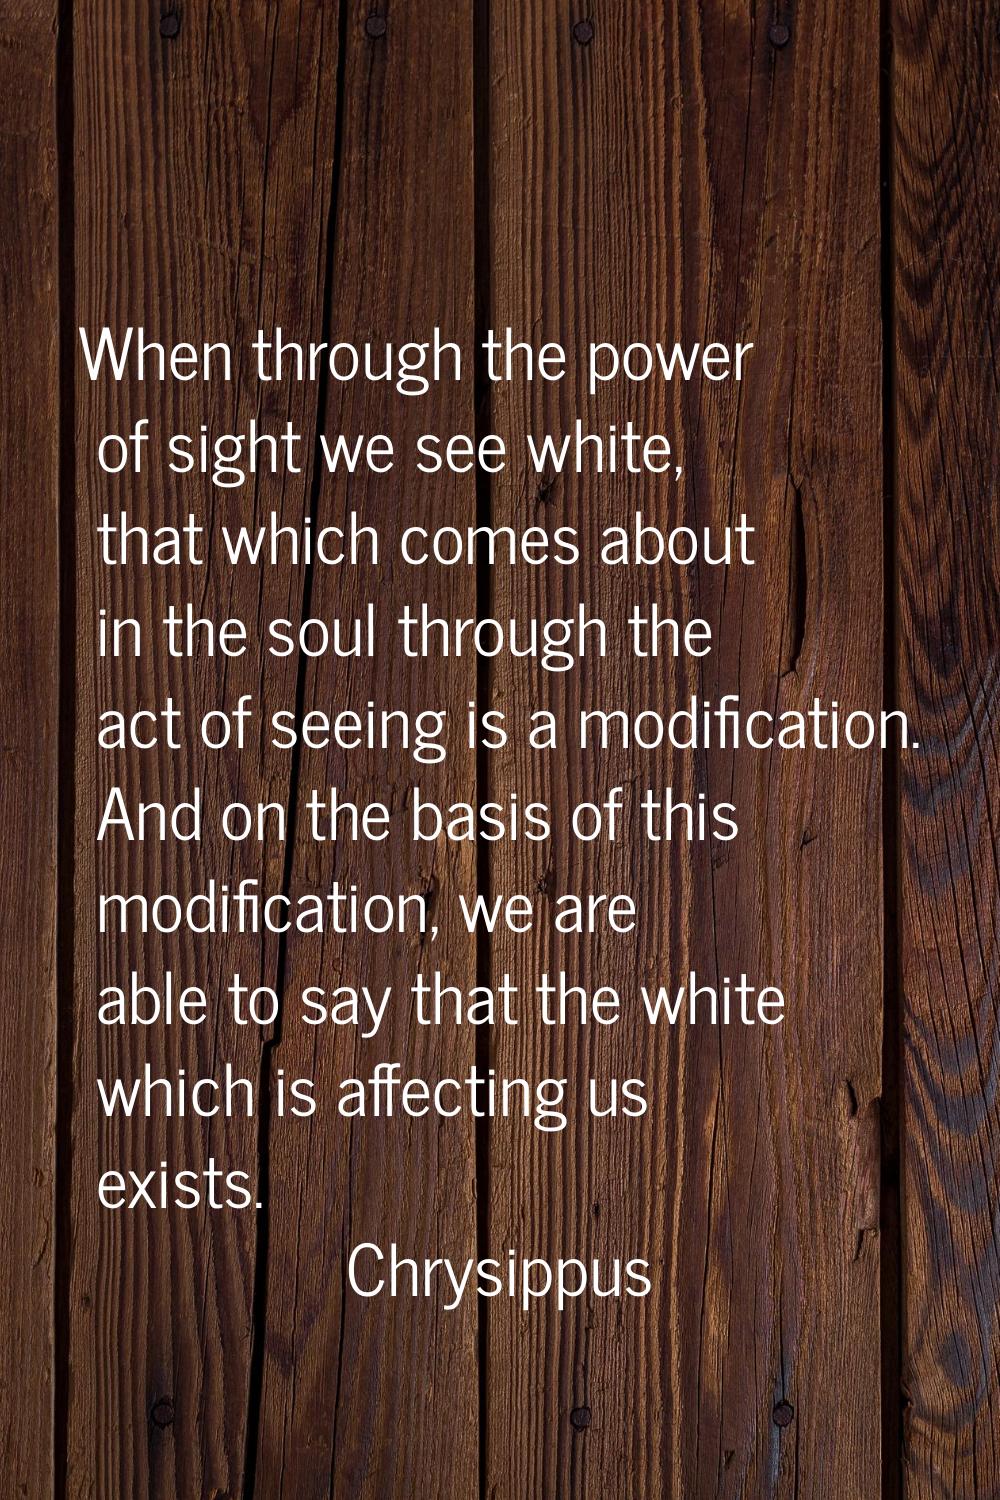 When through the power of sight we see white, that which comes about in the soul through the act of